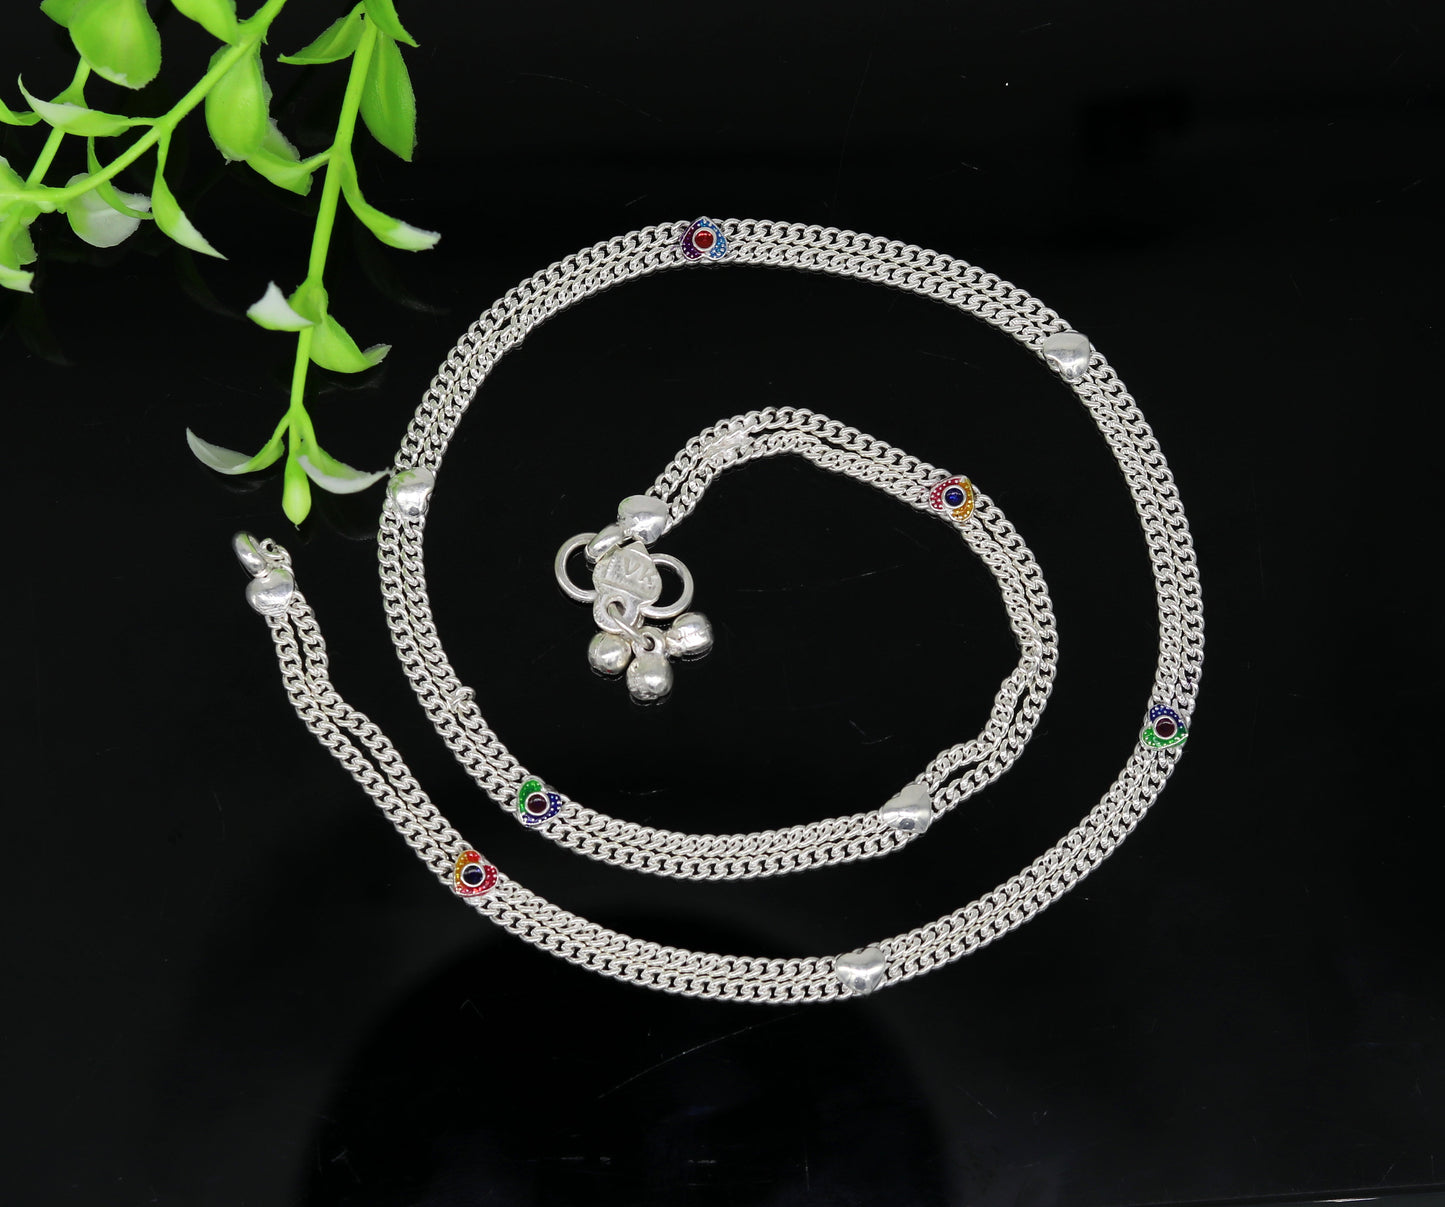 18" long handmade sterling silver amazing baby kids waist chain, excellent customized design baby kids unisex belly chain wch08 - TRIBAL ORNAMENTS